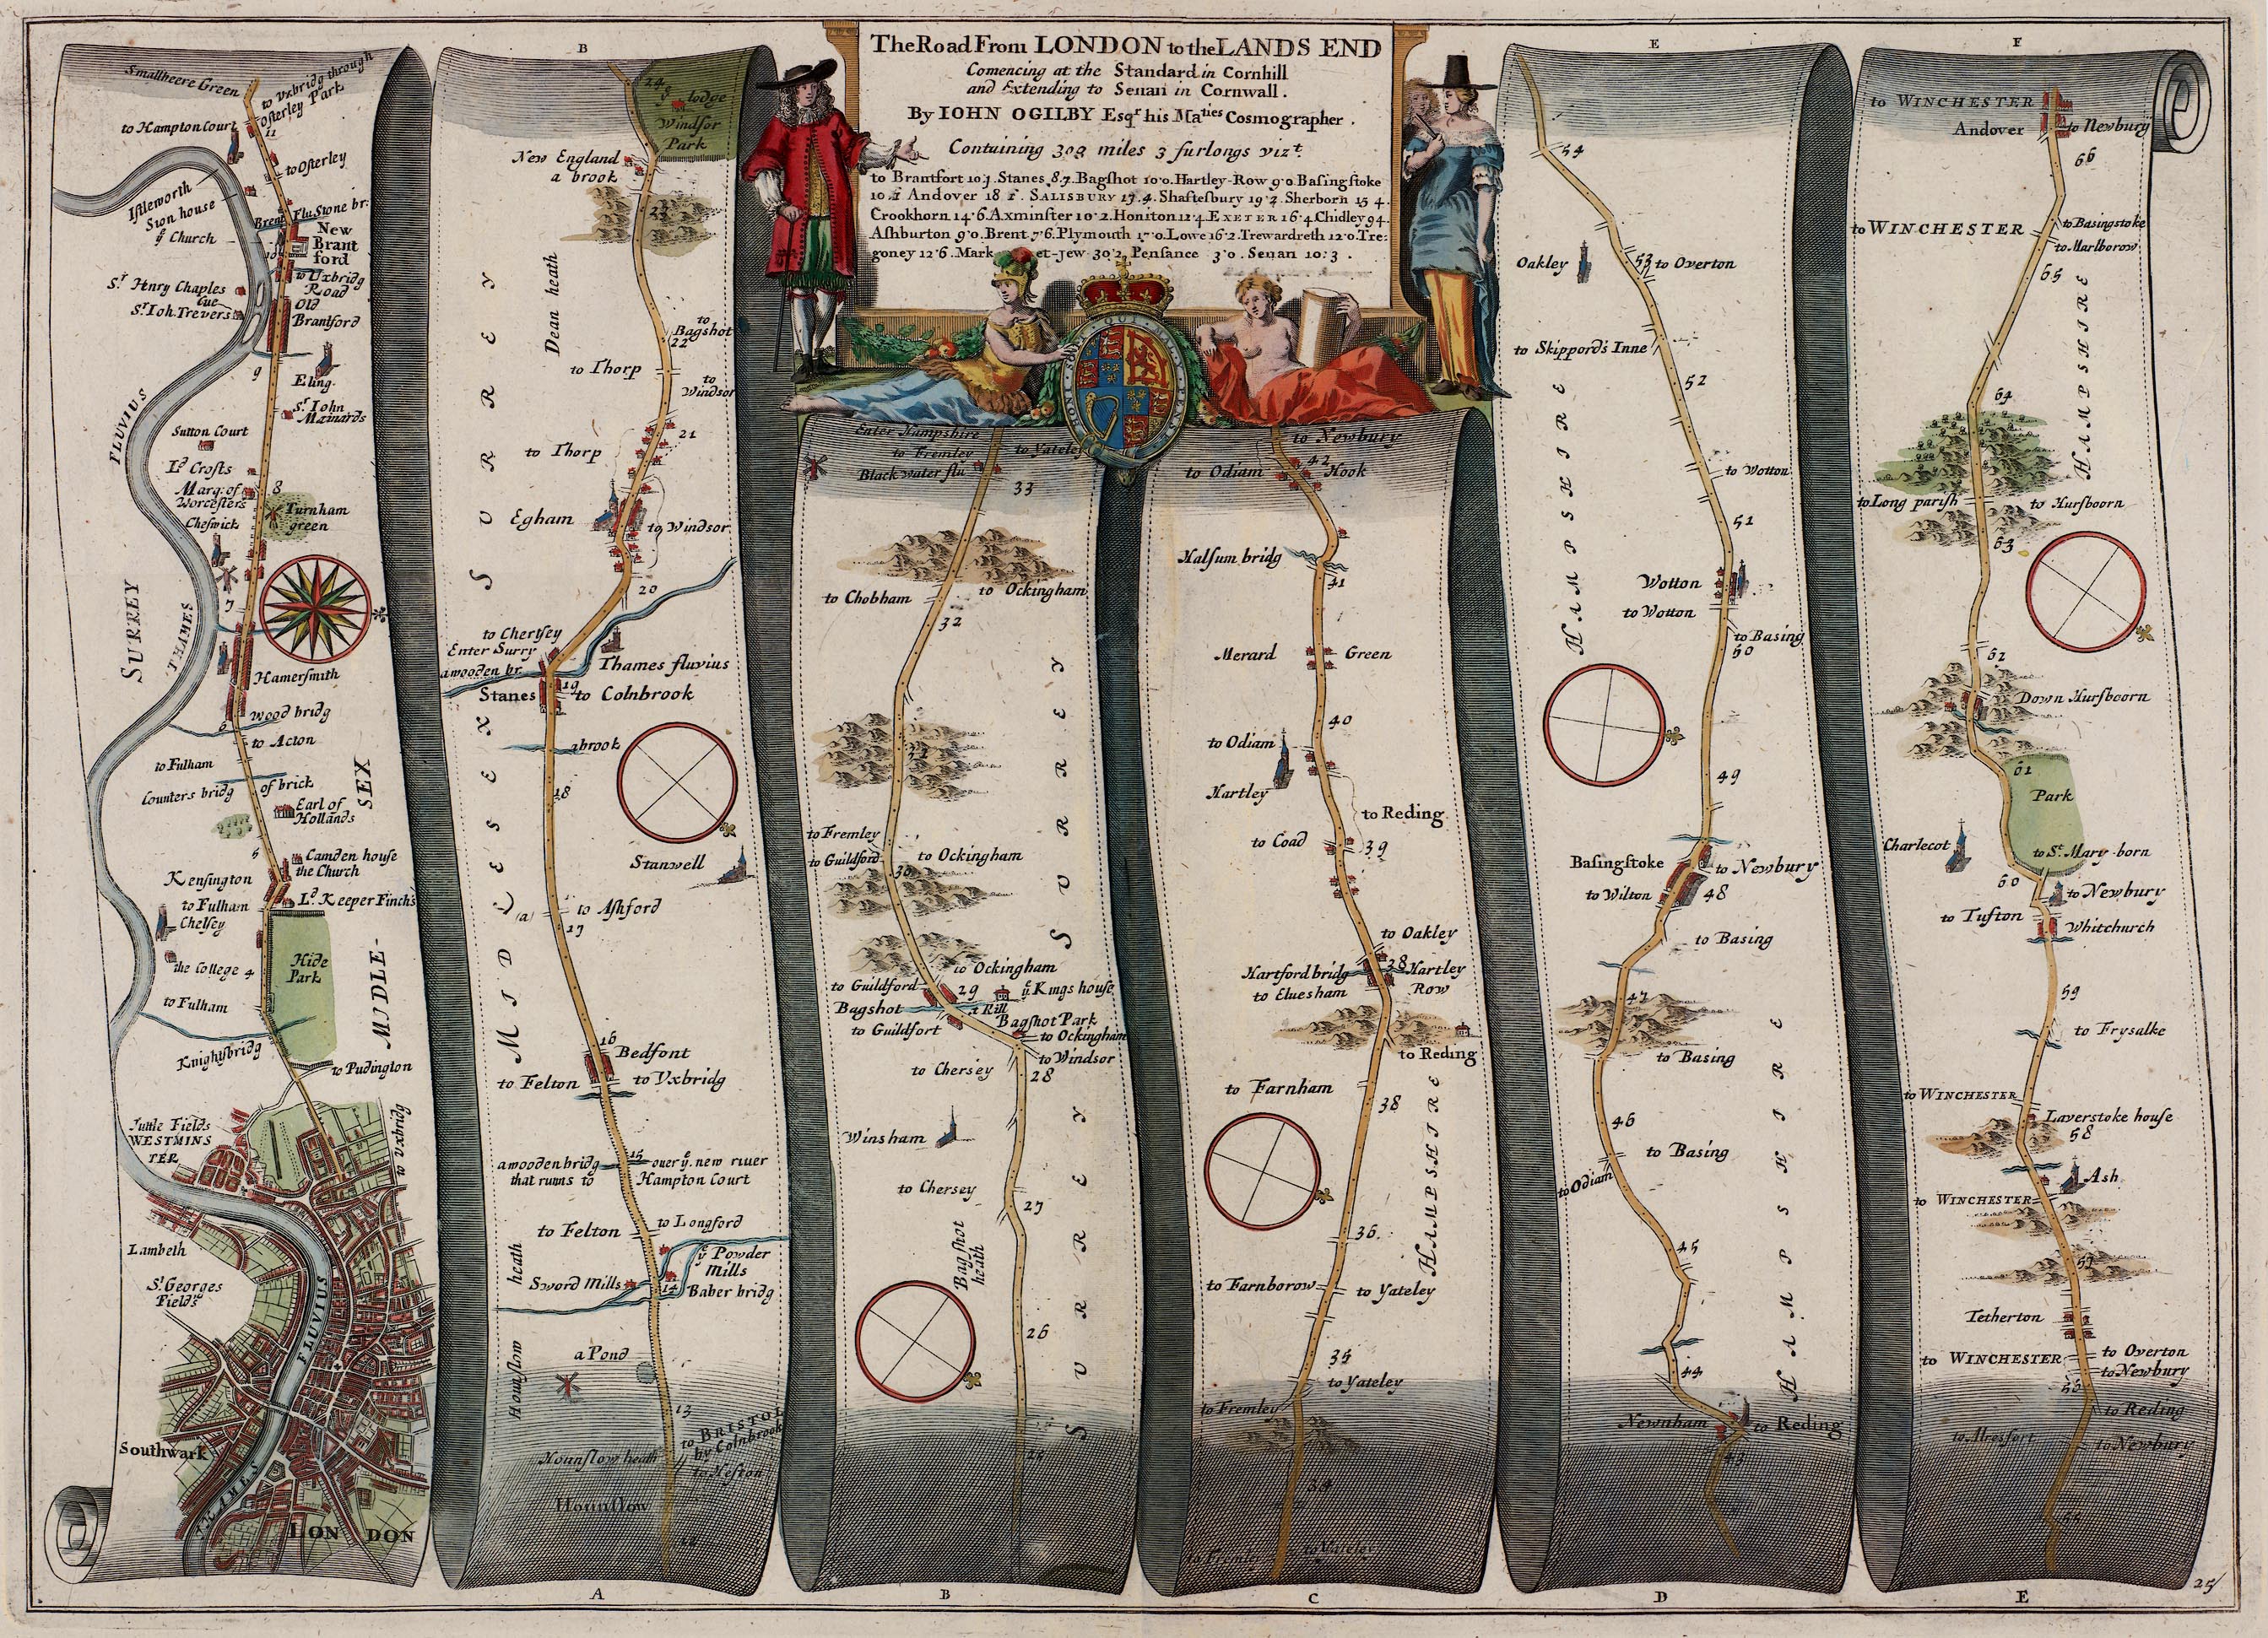 1675 Ogilby_-_The_Road_From_LONDON_to_the_LANDS_END